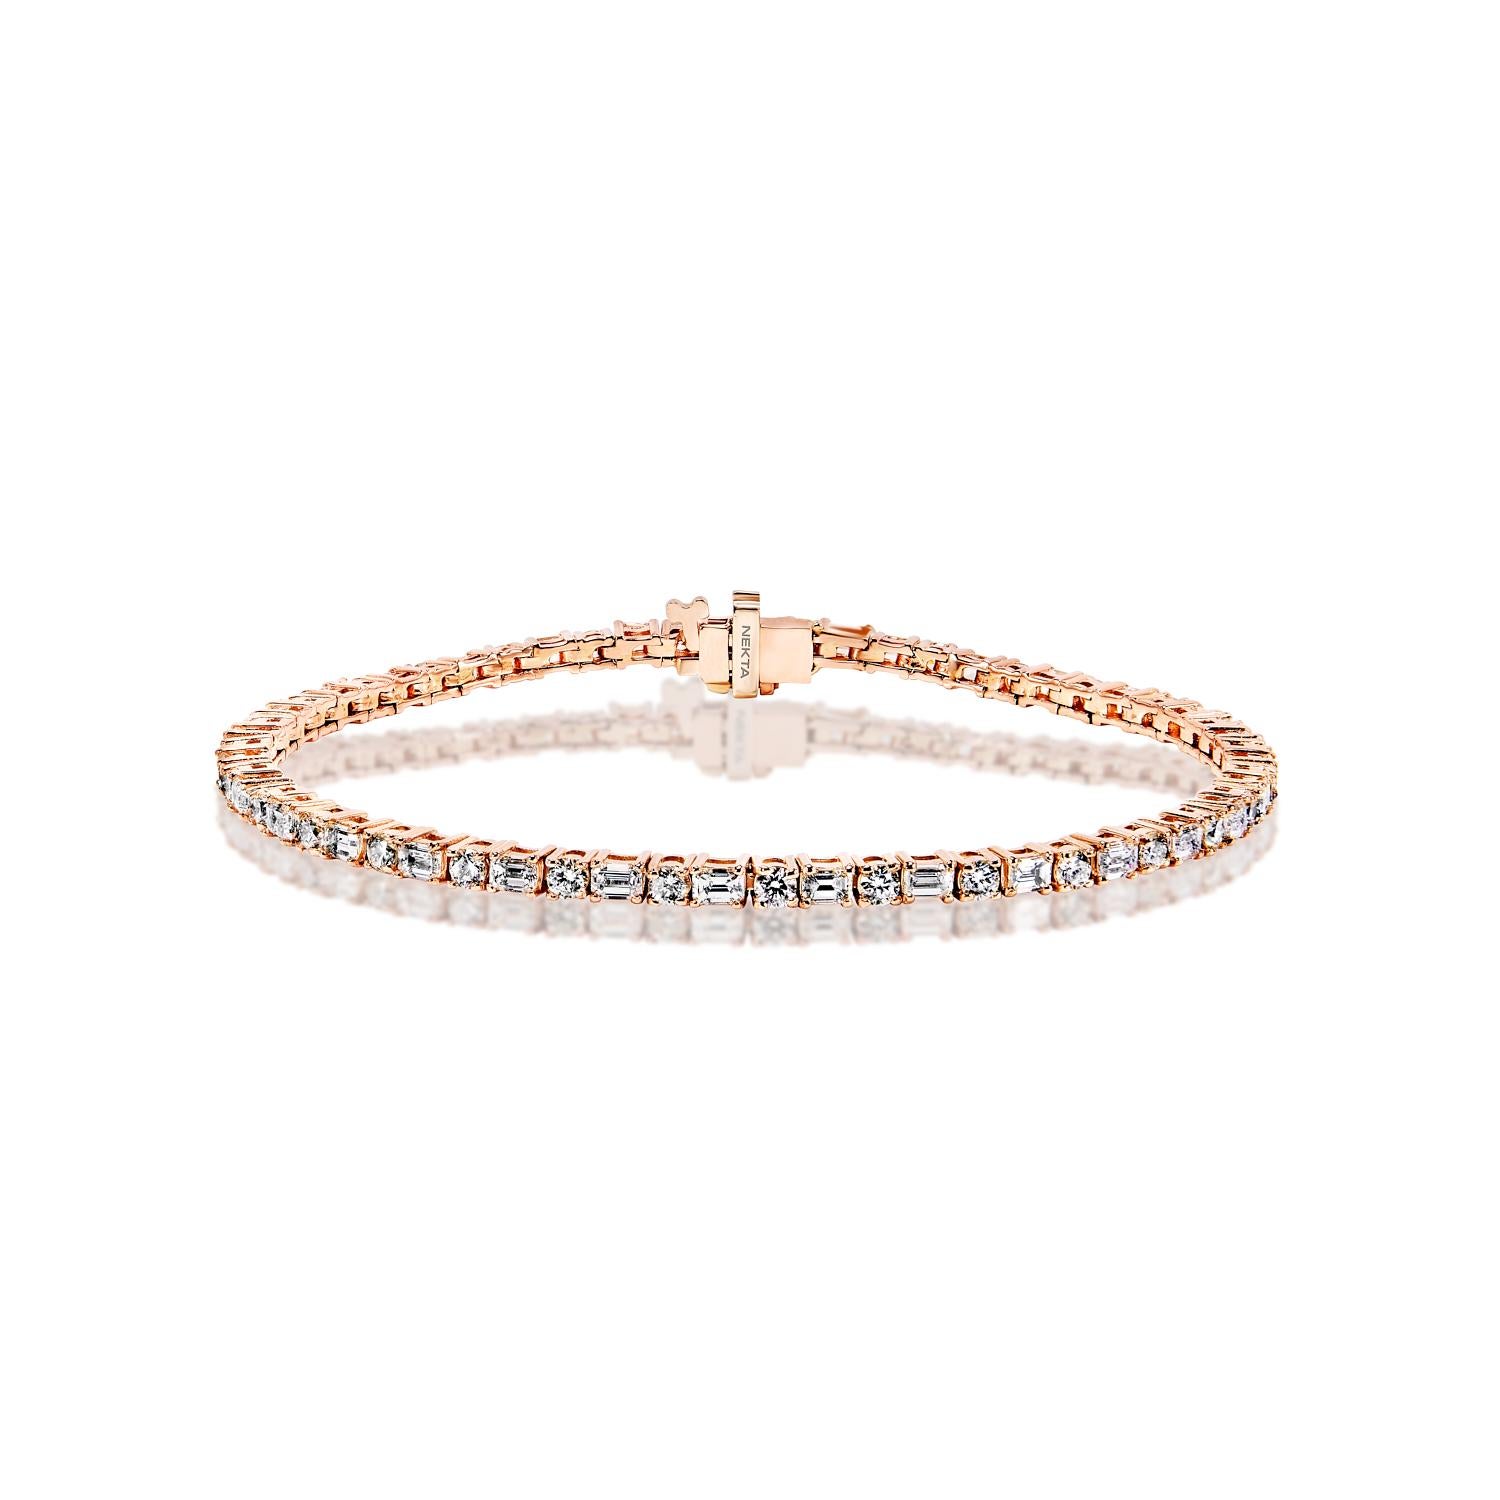 ​The SELENA 5 Carats Diamond Tennis Bracelet 2 Pointers each stone features EMERALD CUT & ROUND BRILLIANT CUT DIAMONDS brilliants weighing a total of approximately 4.57 carats, set in 14K Rose Gold.

Diamond Size: 4.57 Carats
Diamond Shape: Emerald